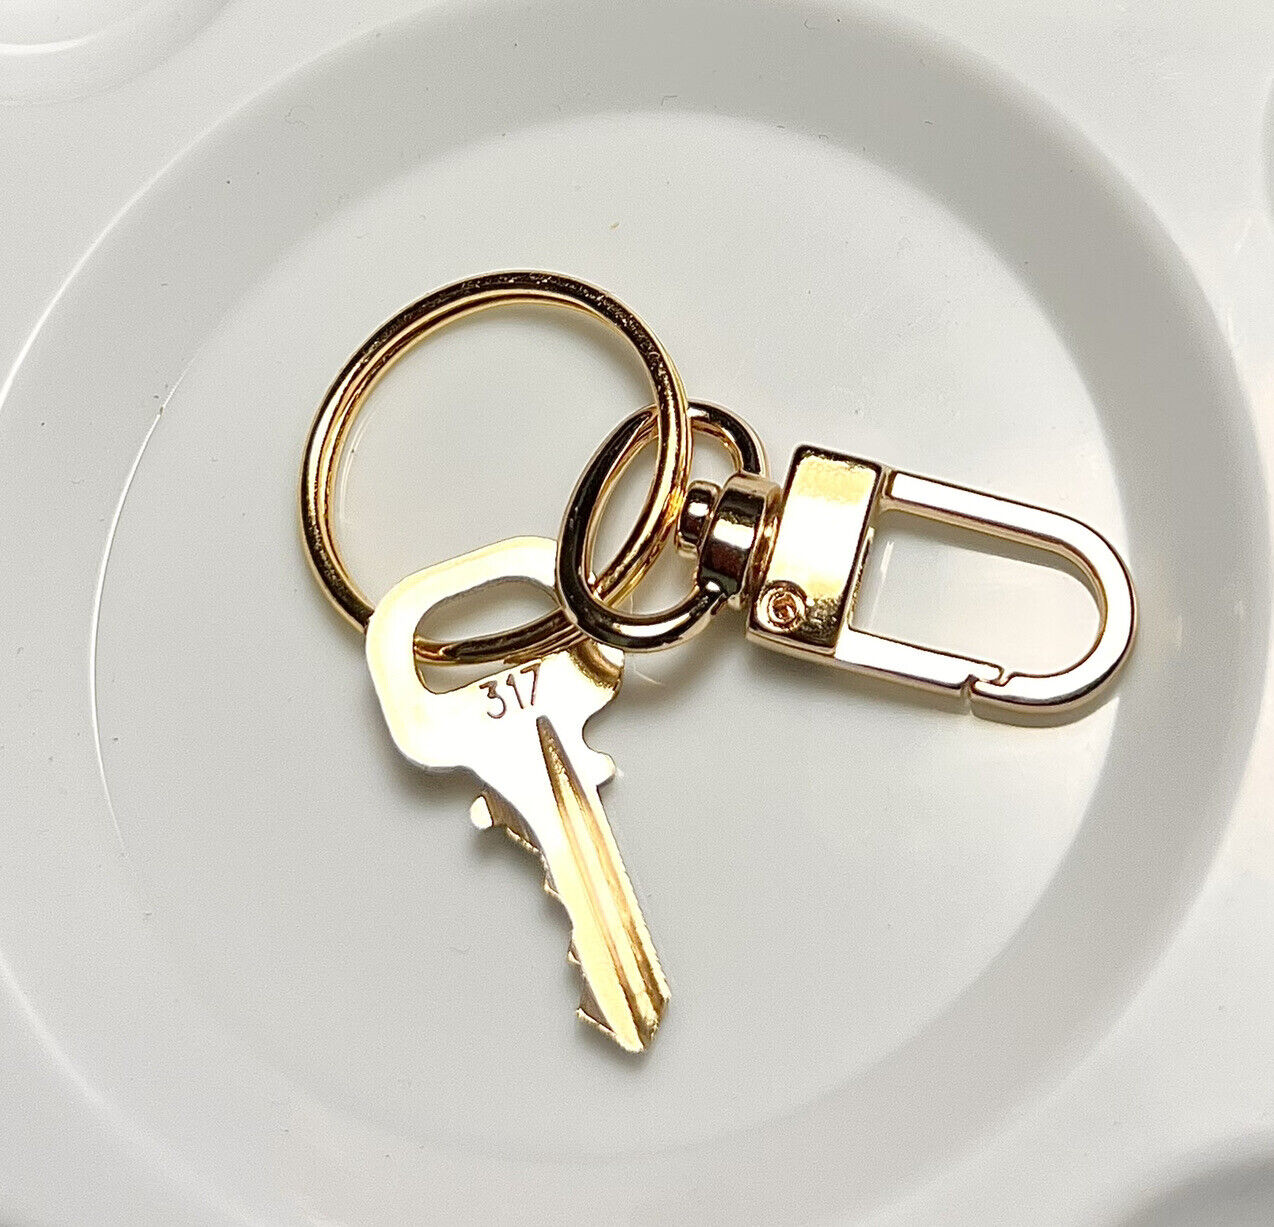 Louis Vuitton Key # 317 Polished Brass - For Authentic LV Lock only No. 317